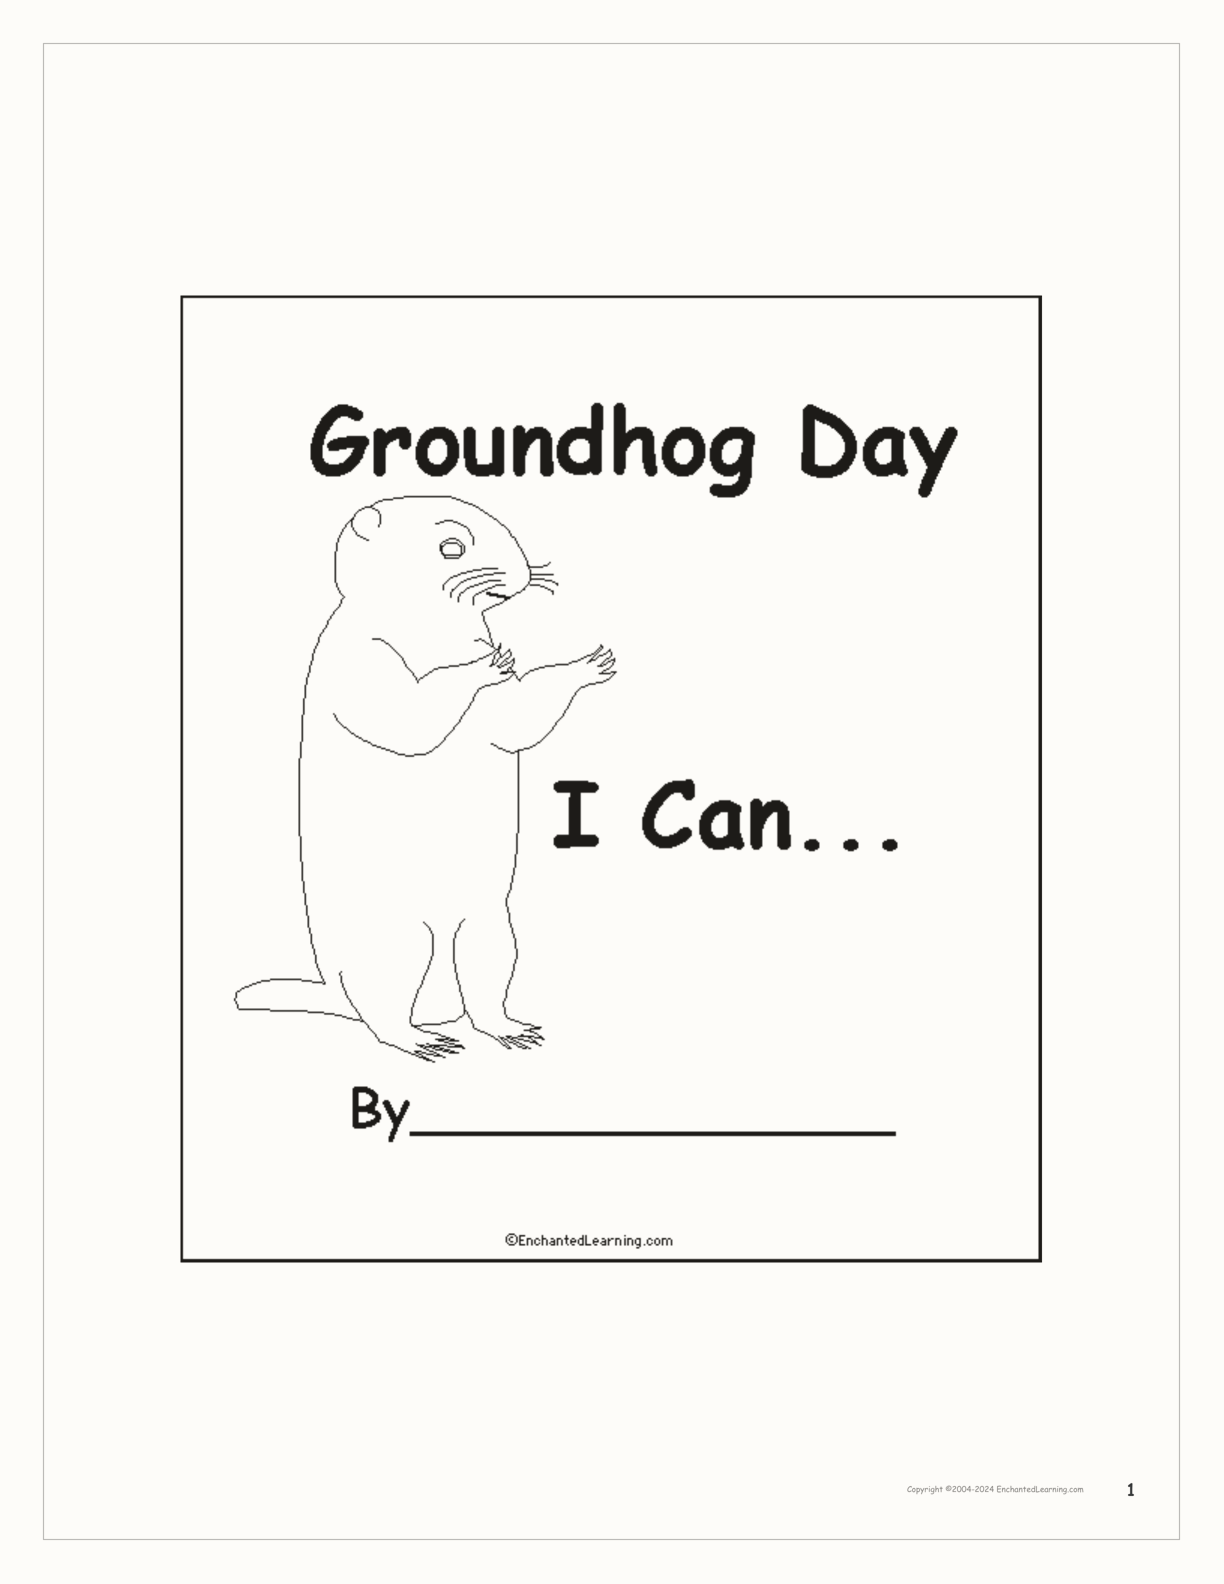 Groundhog Day 'I Can' Book interactive worksheet page 1